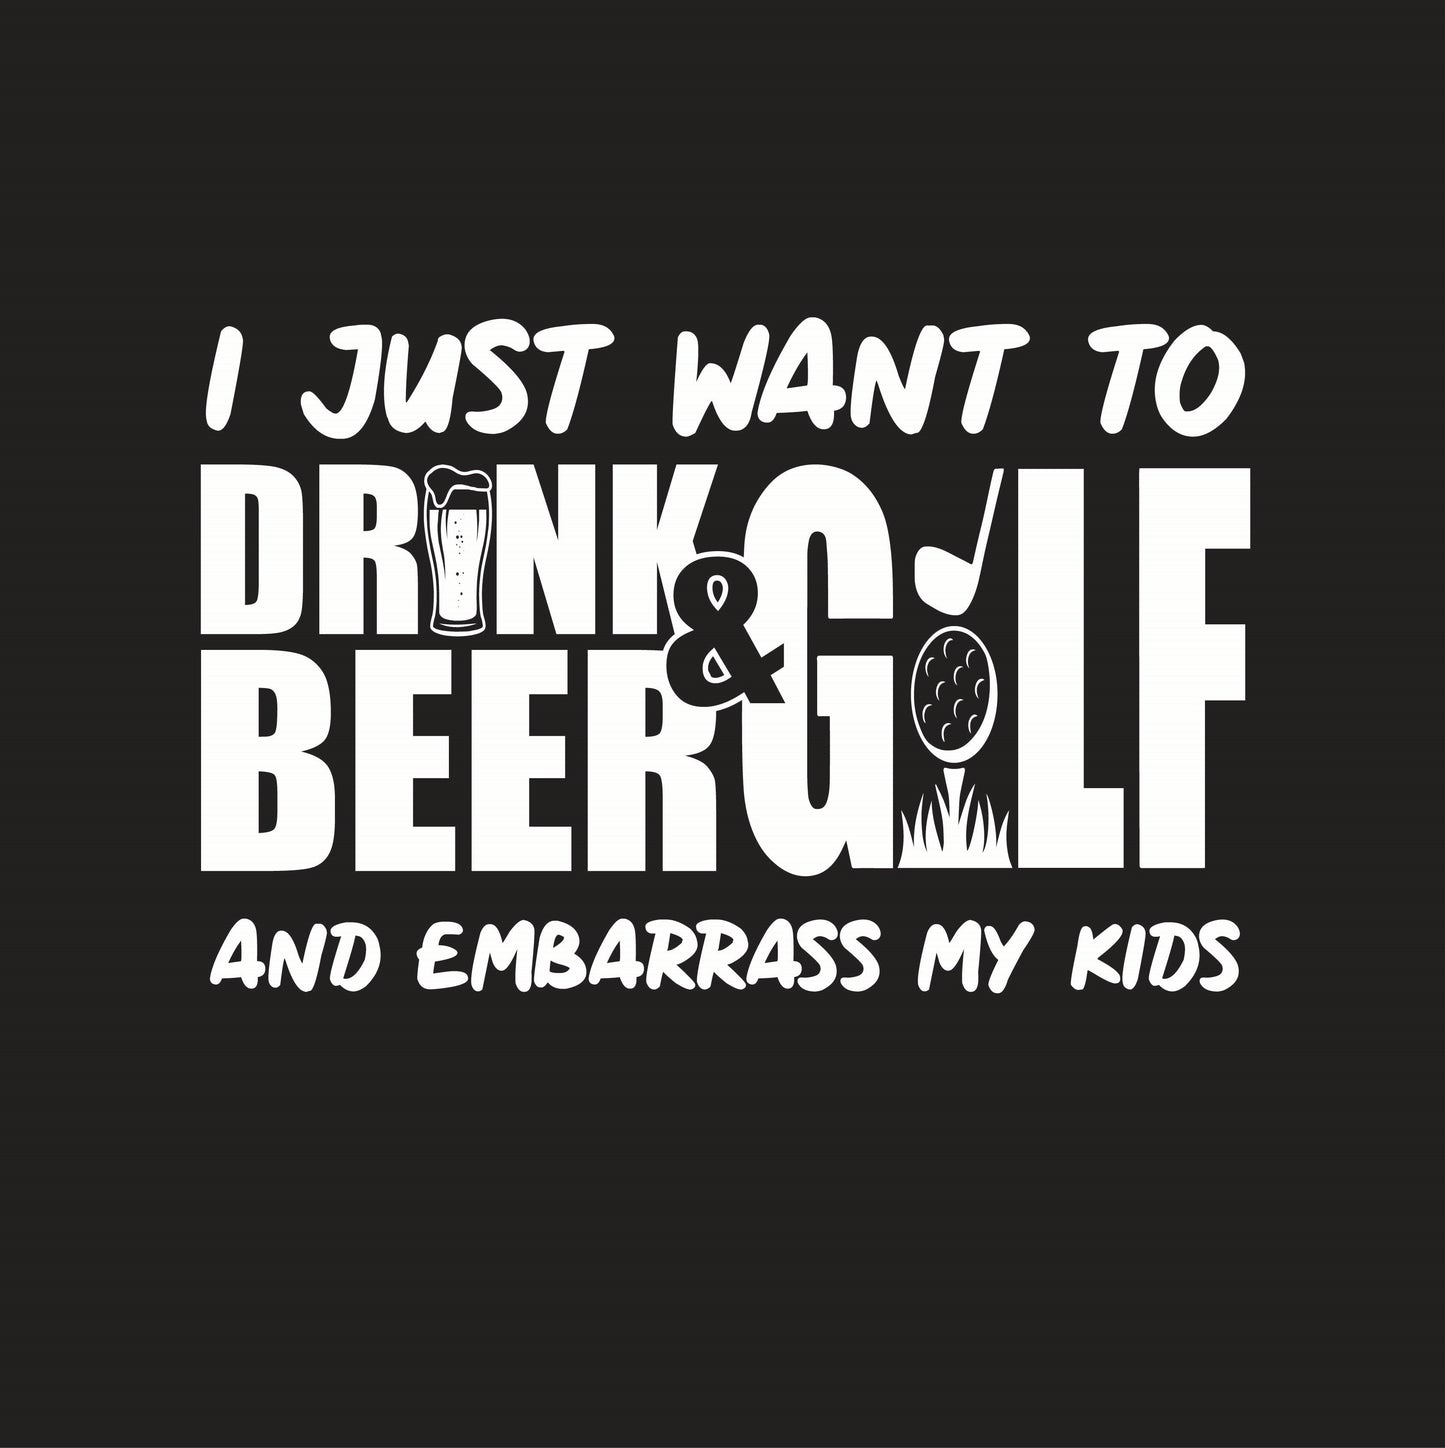 I Just Want To Drink Beer & Golf And Embarrass My Kids